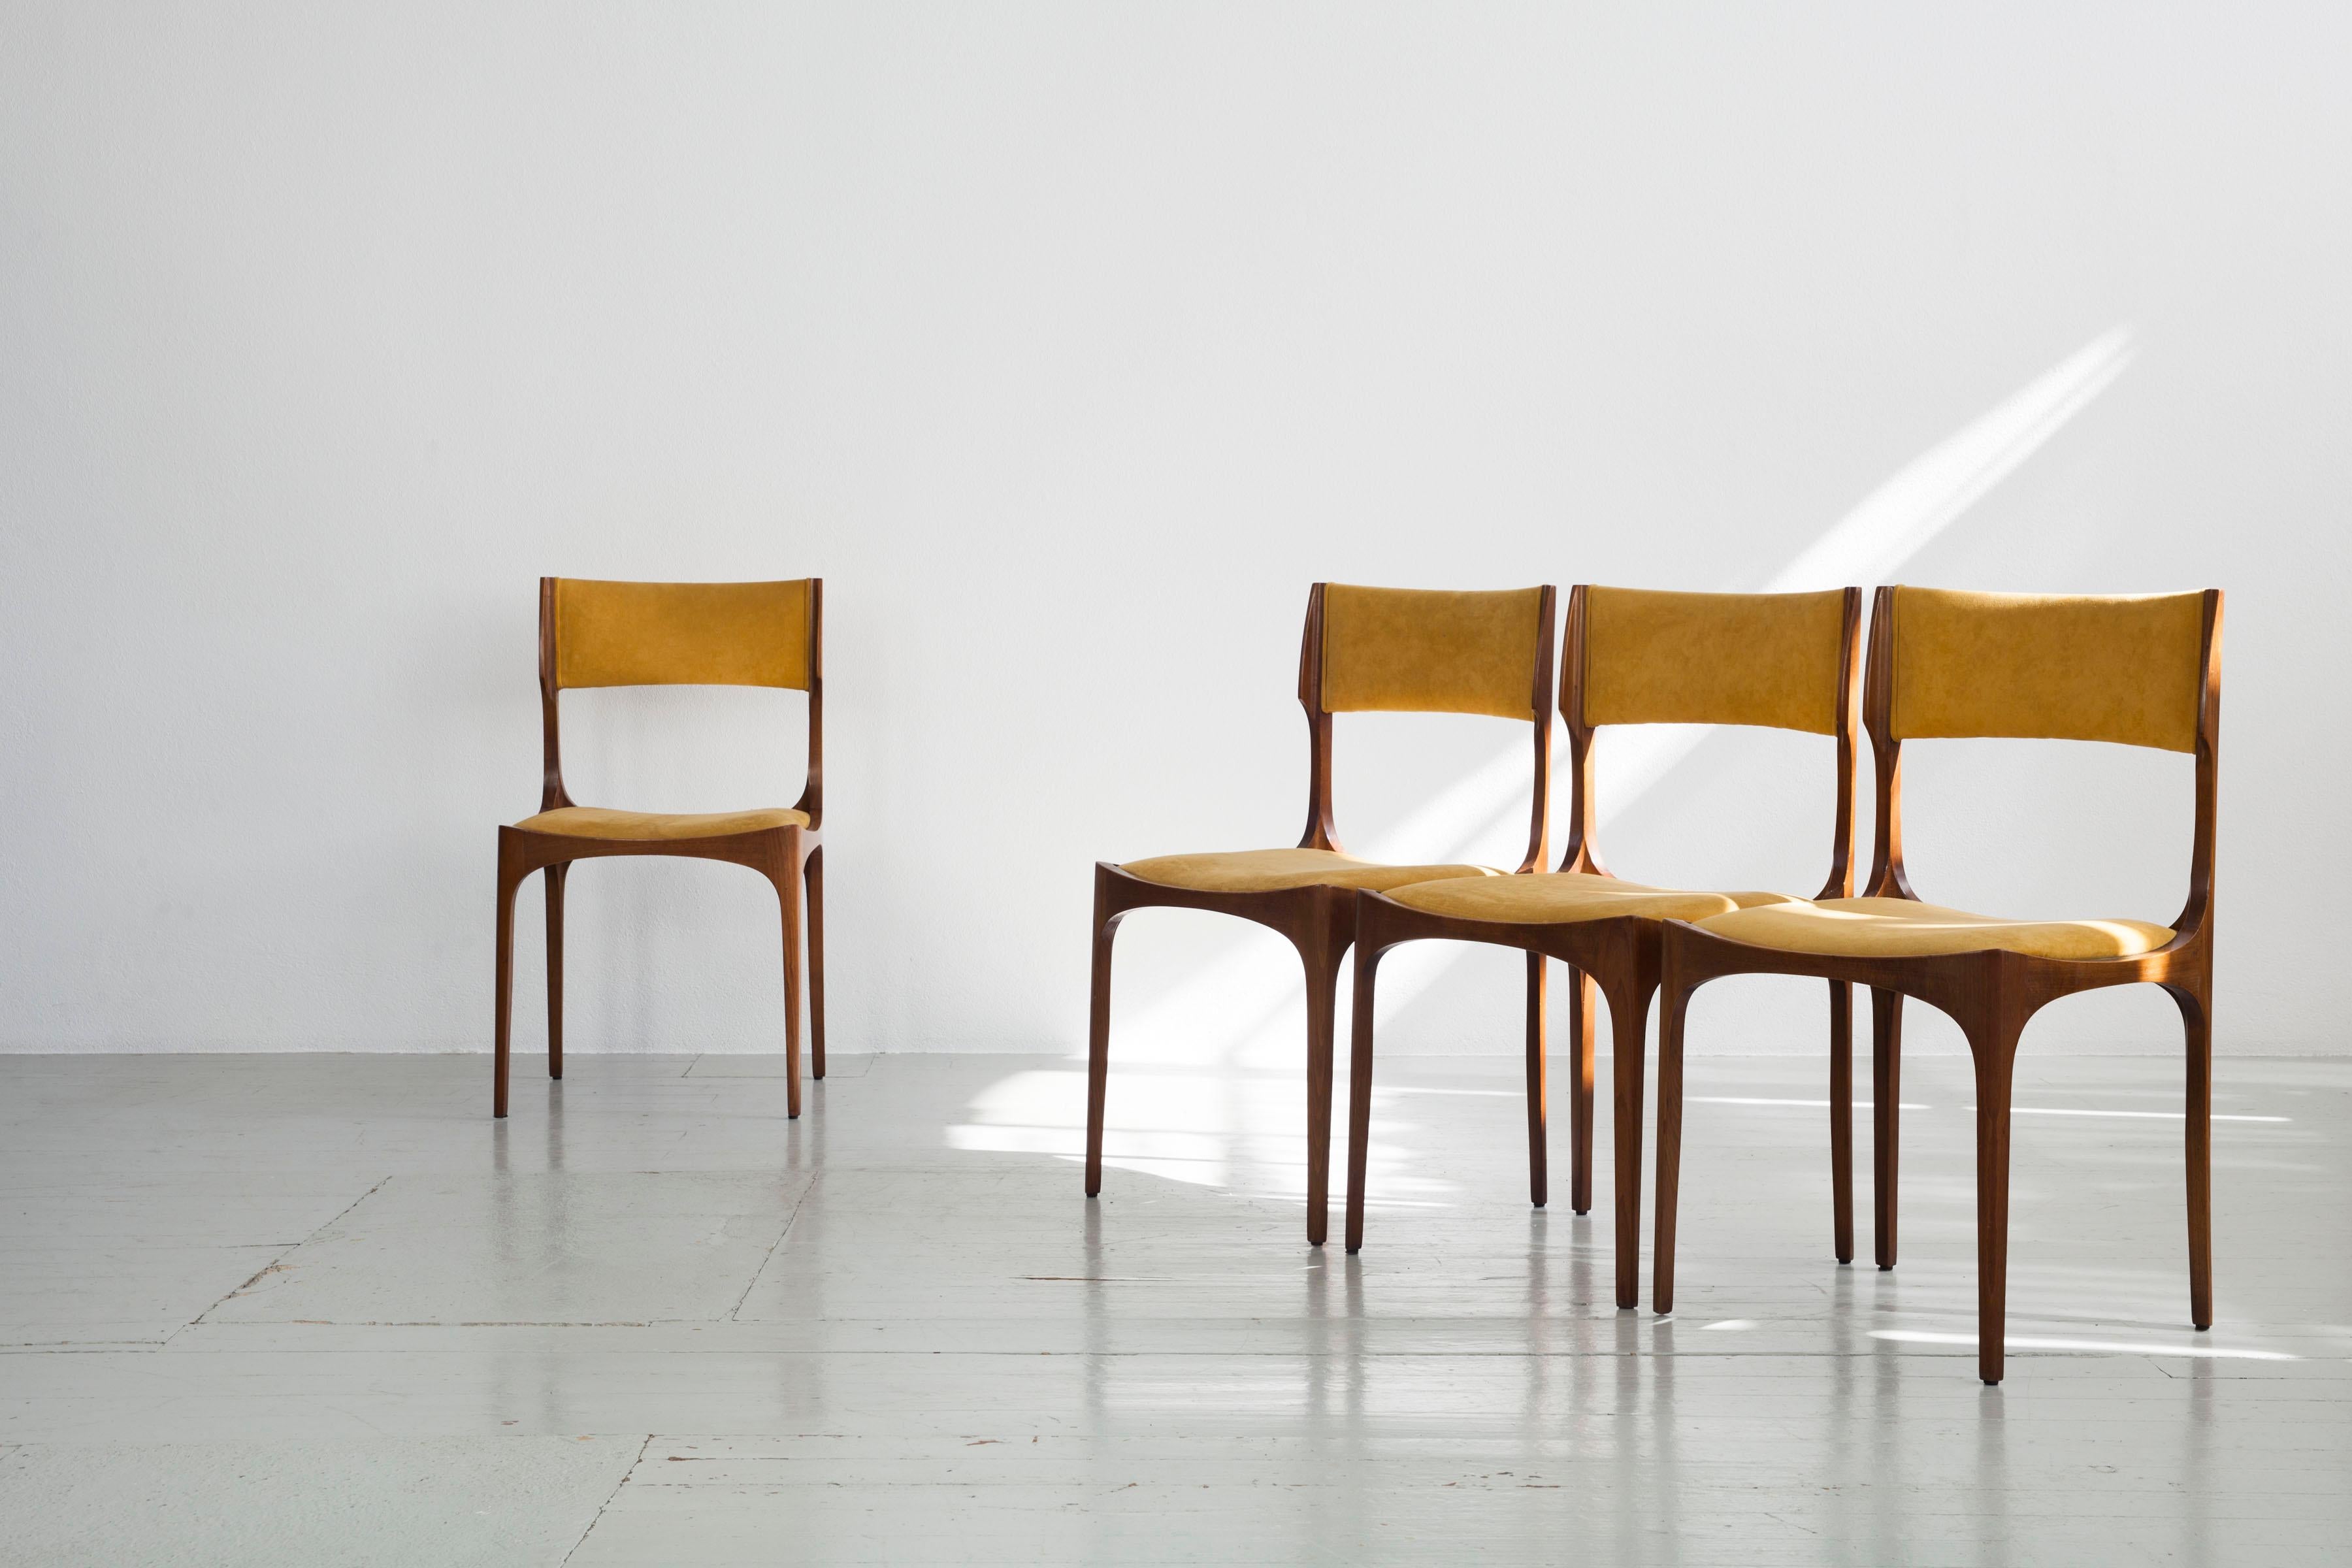 This set of four chairs was designed by Guiseppe Gibelli for Fratelli Maspero and manufactured by Sormani in Italy, Mariano Comense in the 1960s. The 